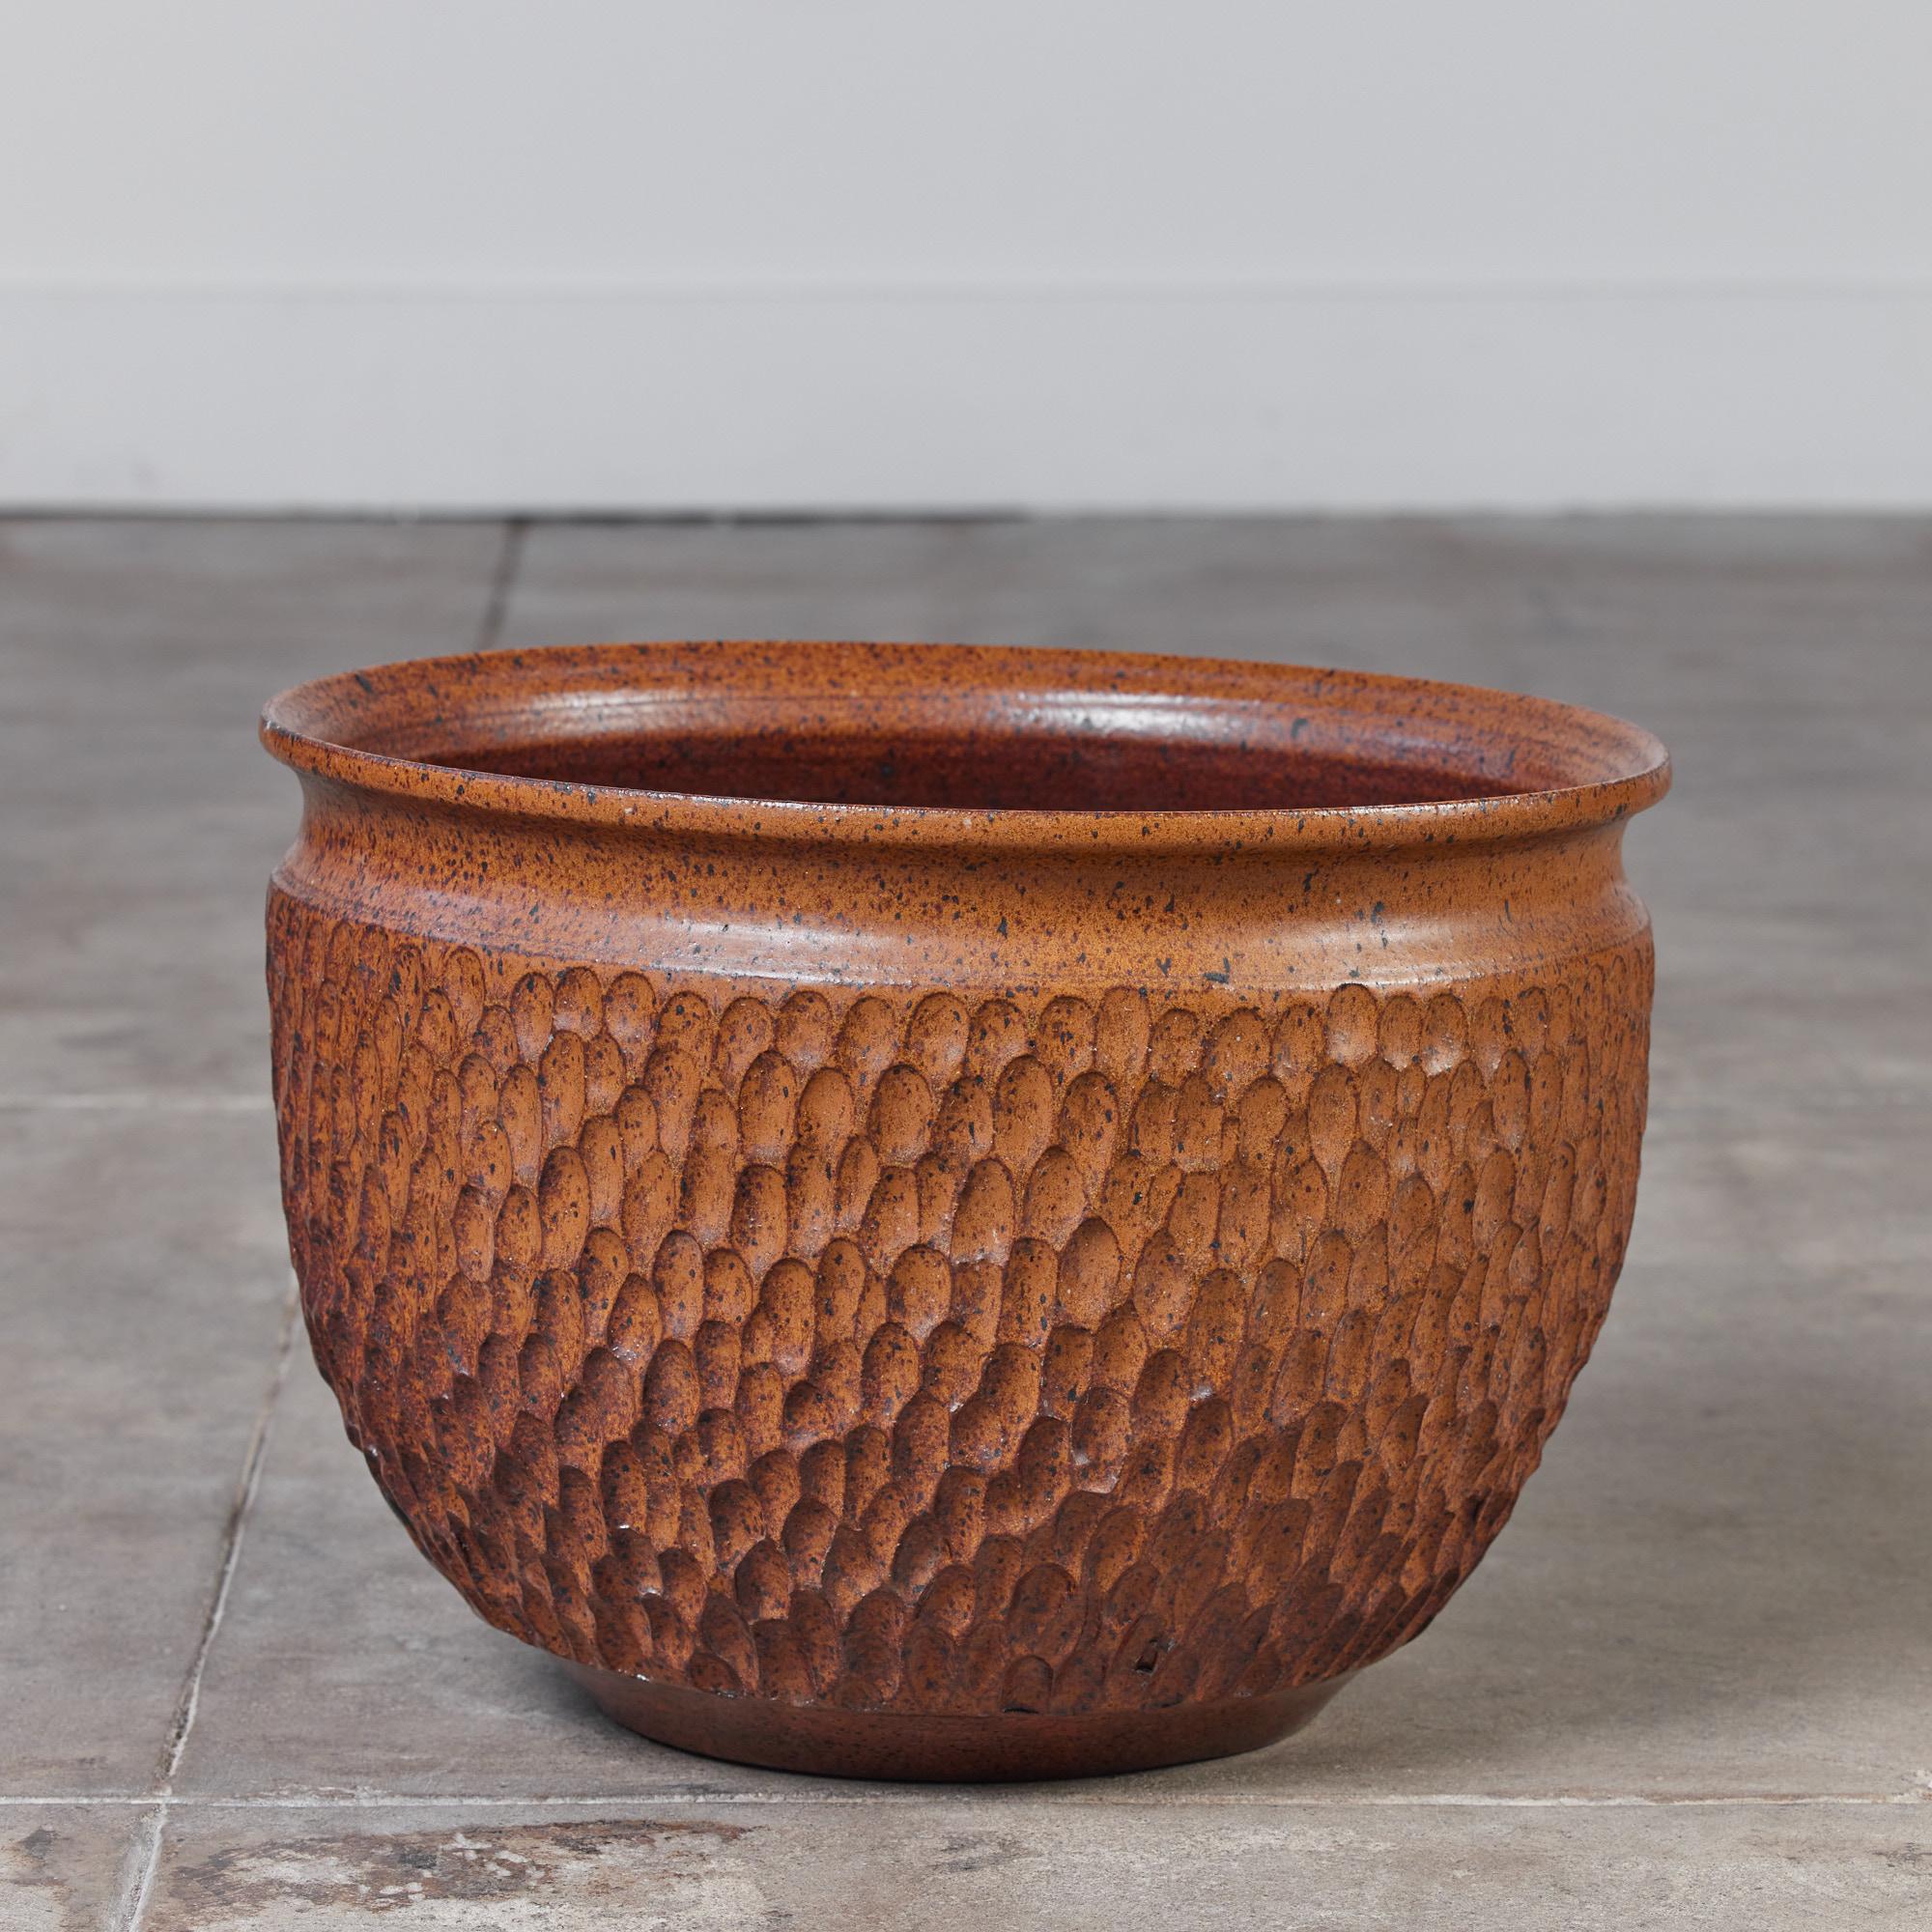 A wide stoneware planter from Robert Maxwell and David Cressey’s 1970s collaboration, Earthgender. One of the less common designs from this partnership, the ‘thumbprint’ pattern has a textured surface of repeating impressed concavities. This example